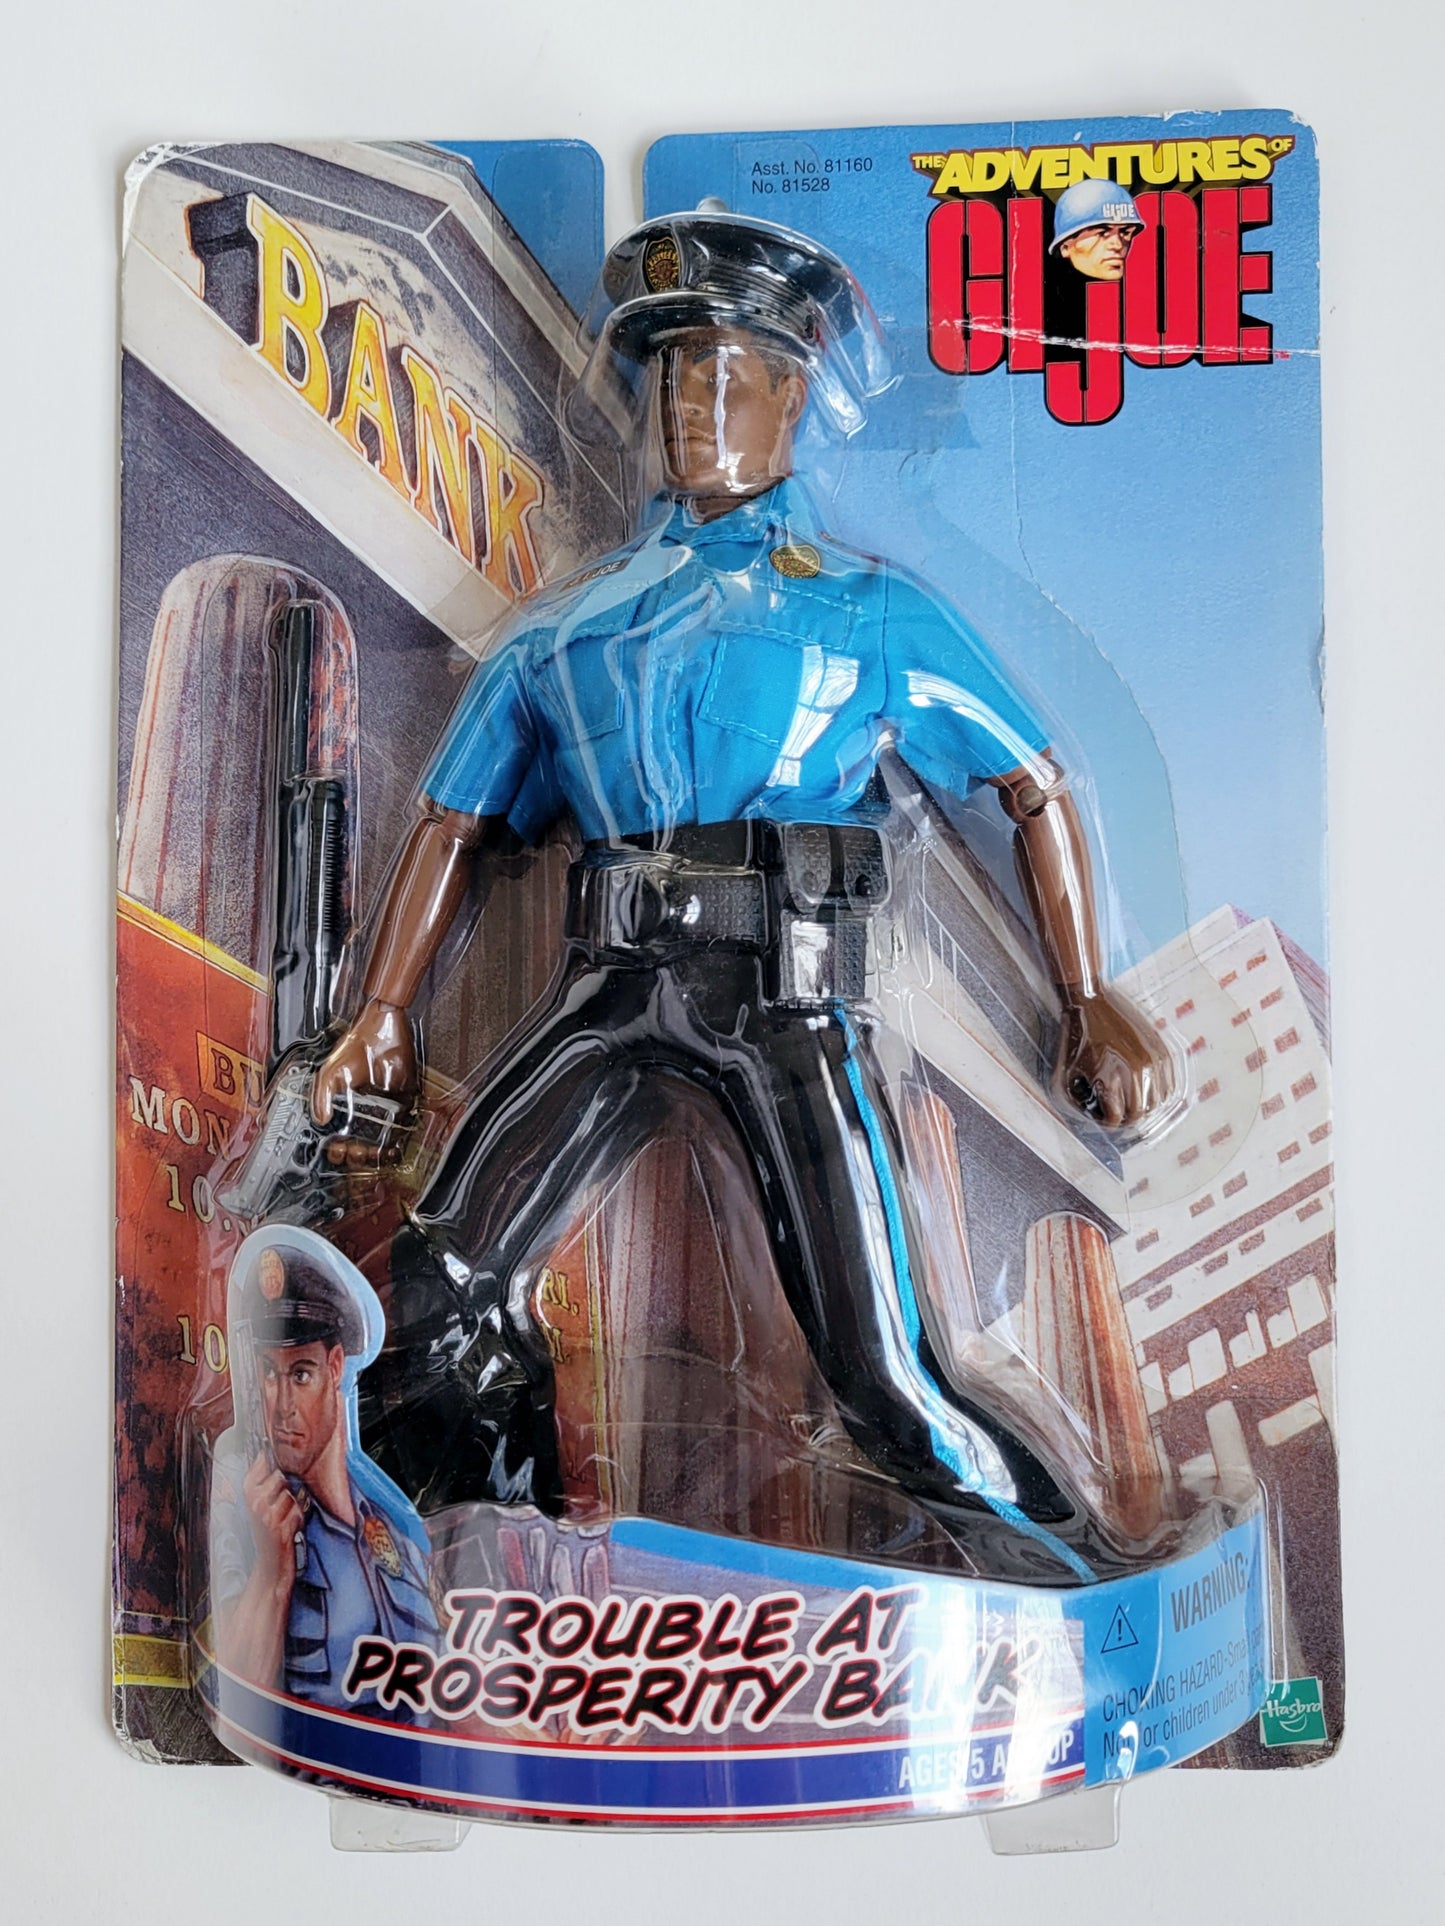 Adventures of G.I. Joe Trouble at Prosperity Bank (African-American) 12-Inch Action Figure